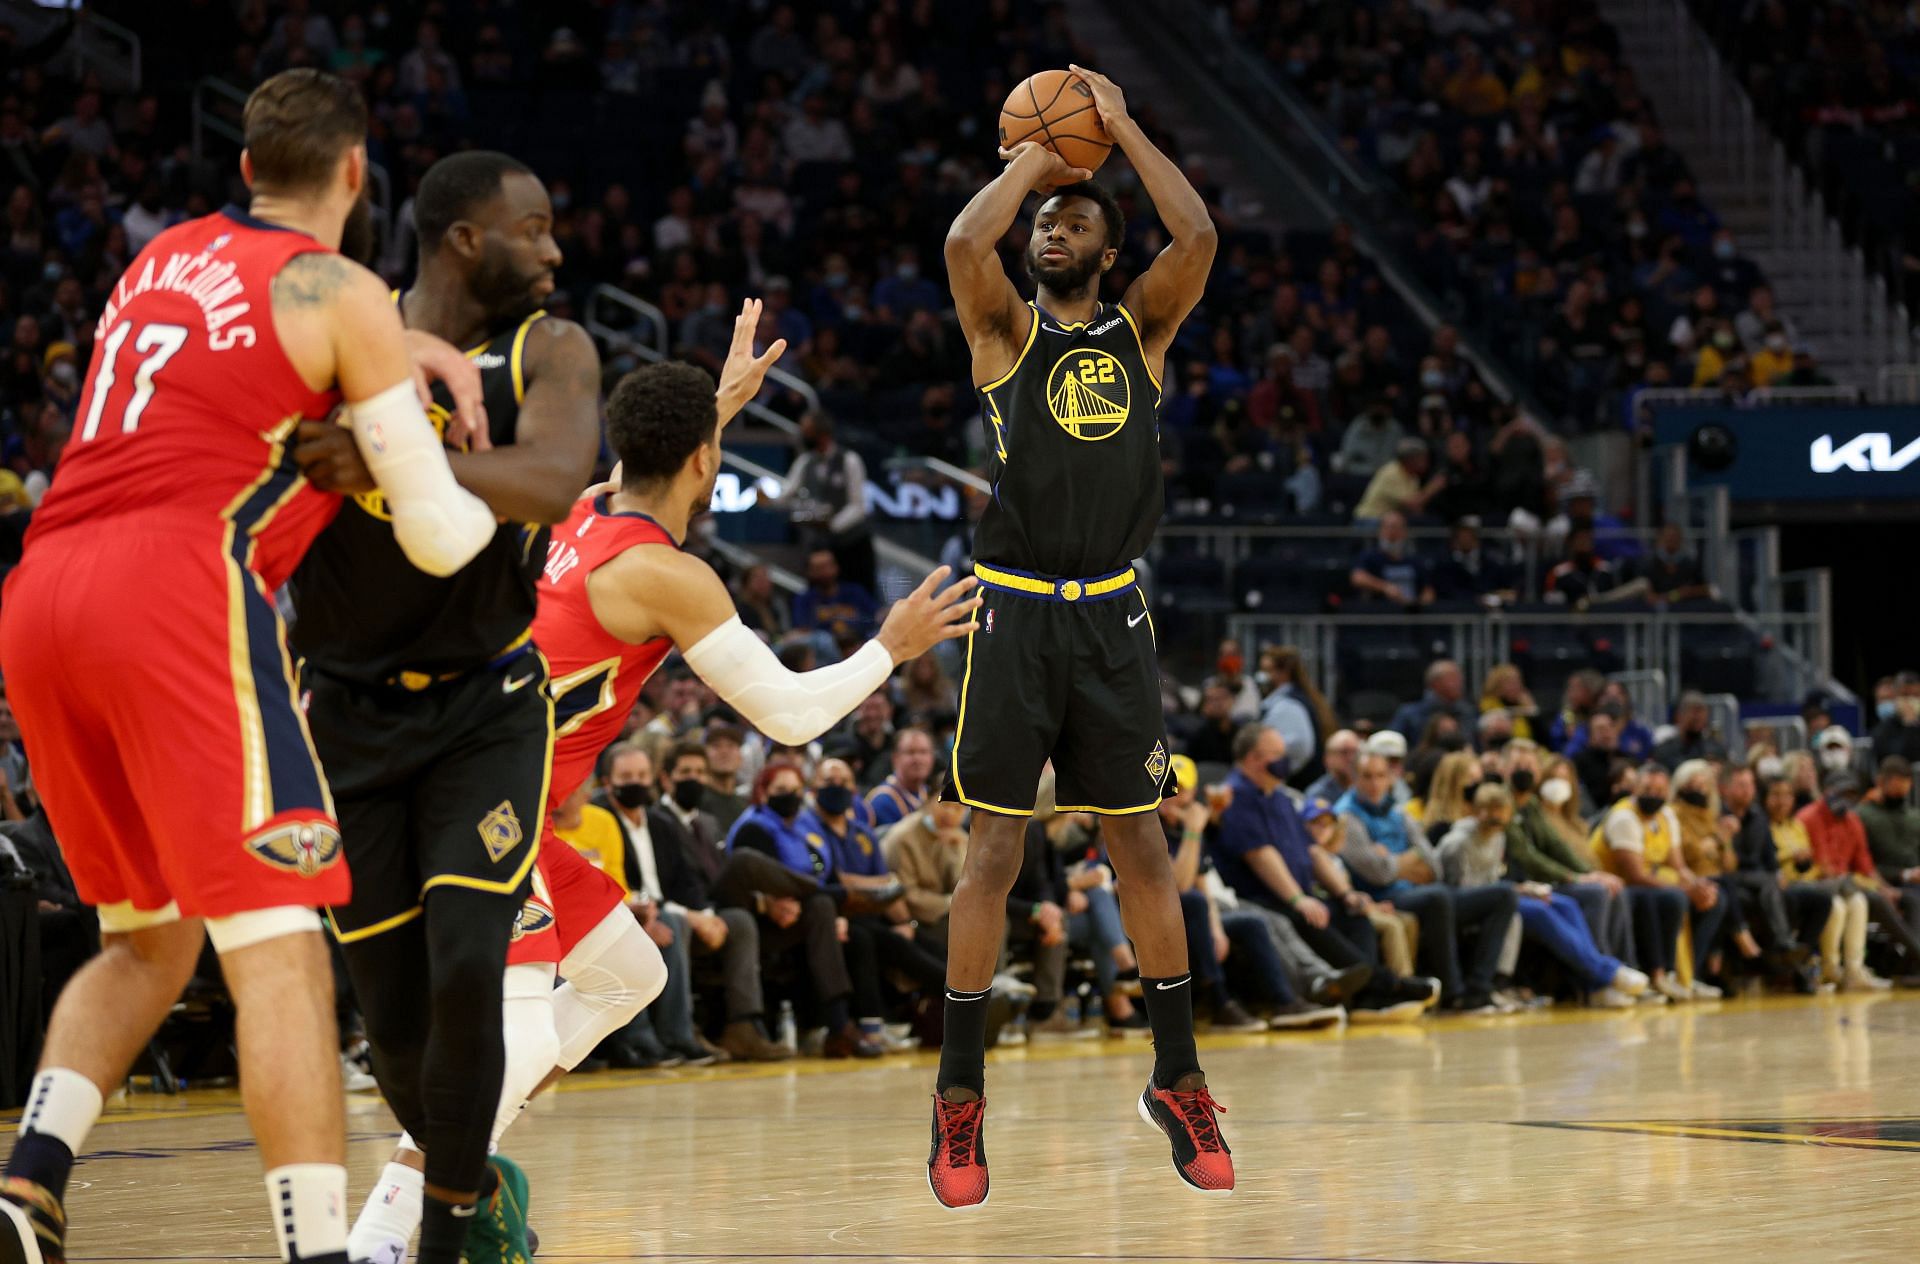 Andrew Wiggins of the Warriors shoots the ball against the Pelicans